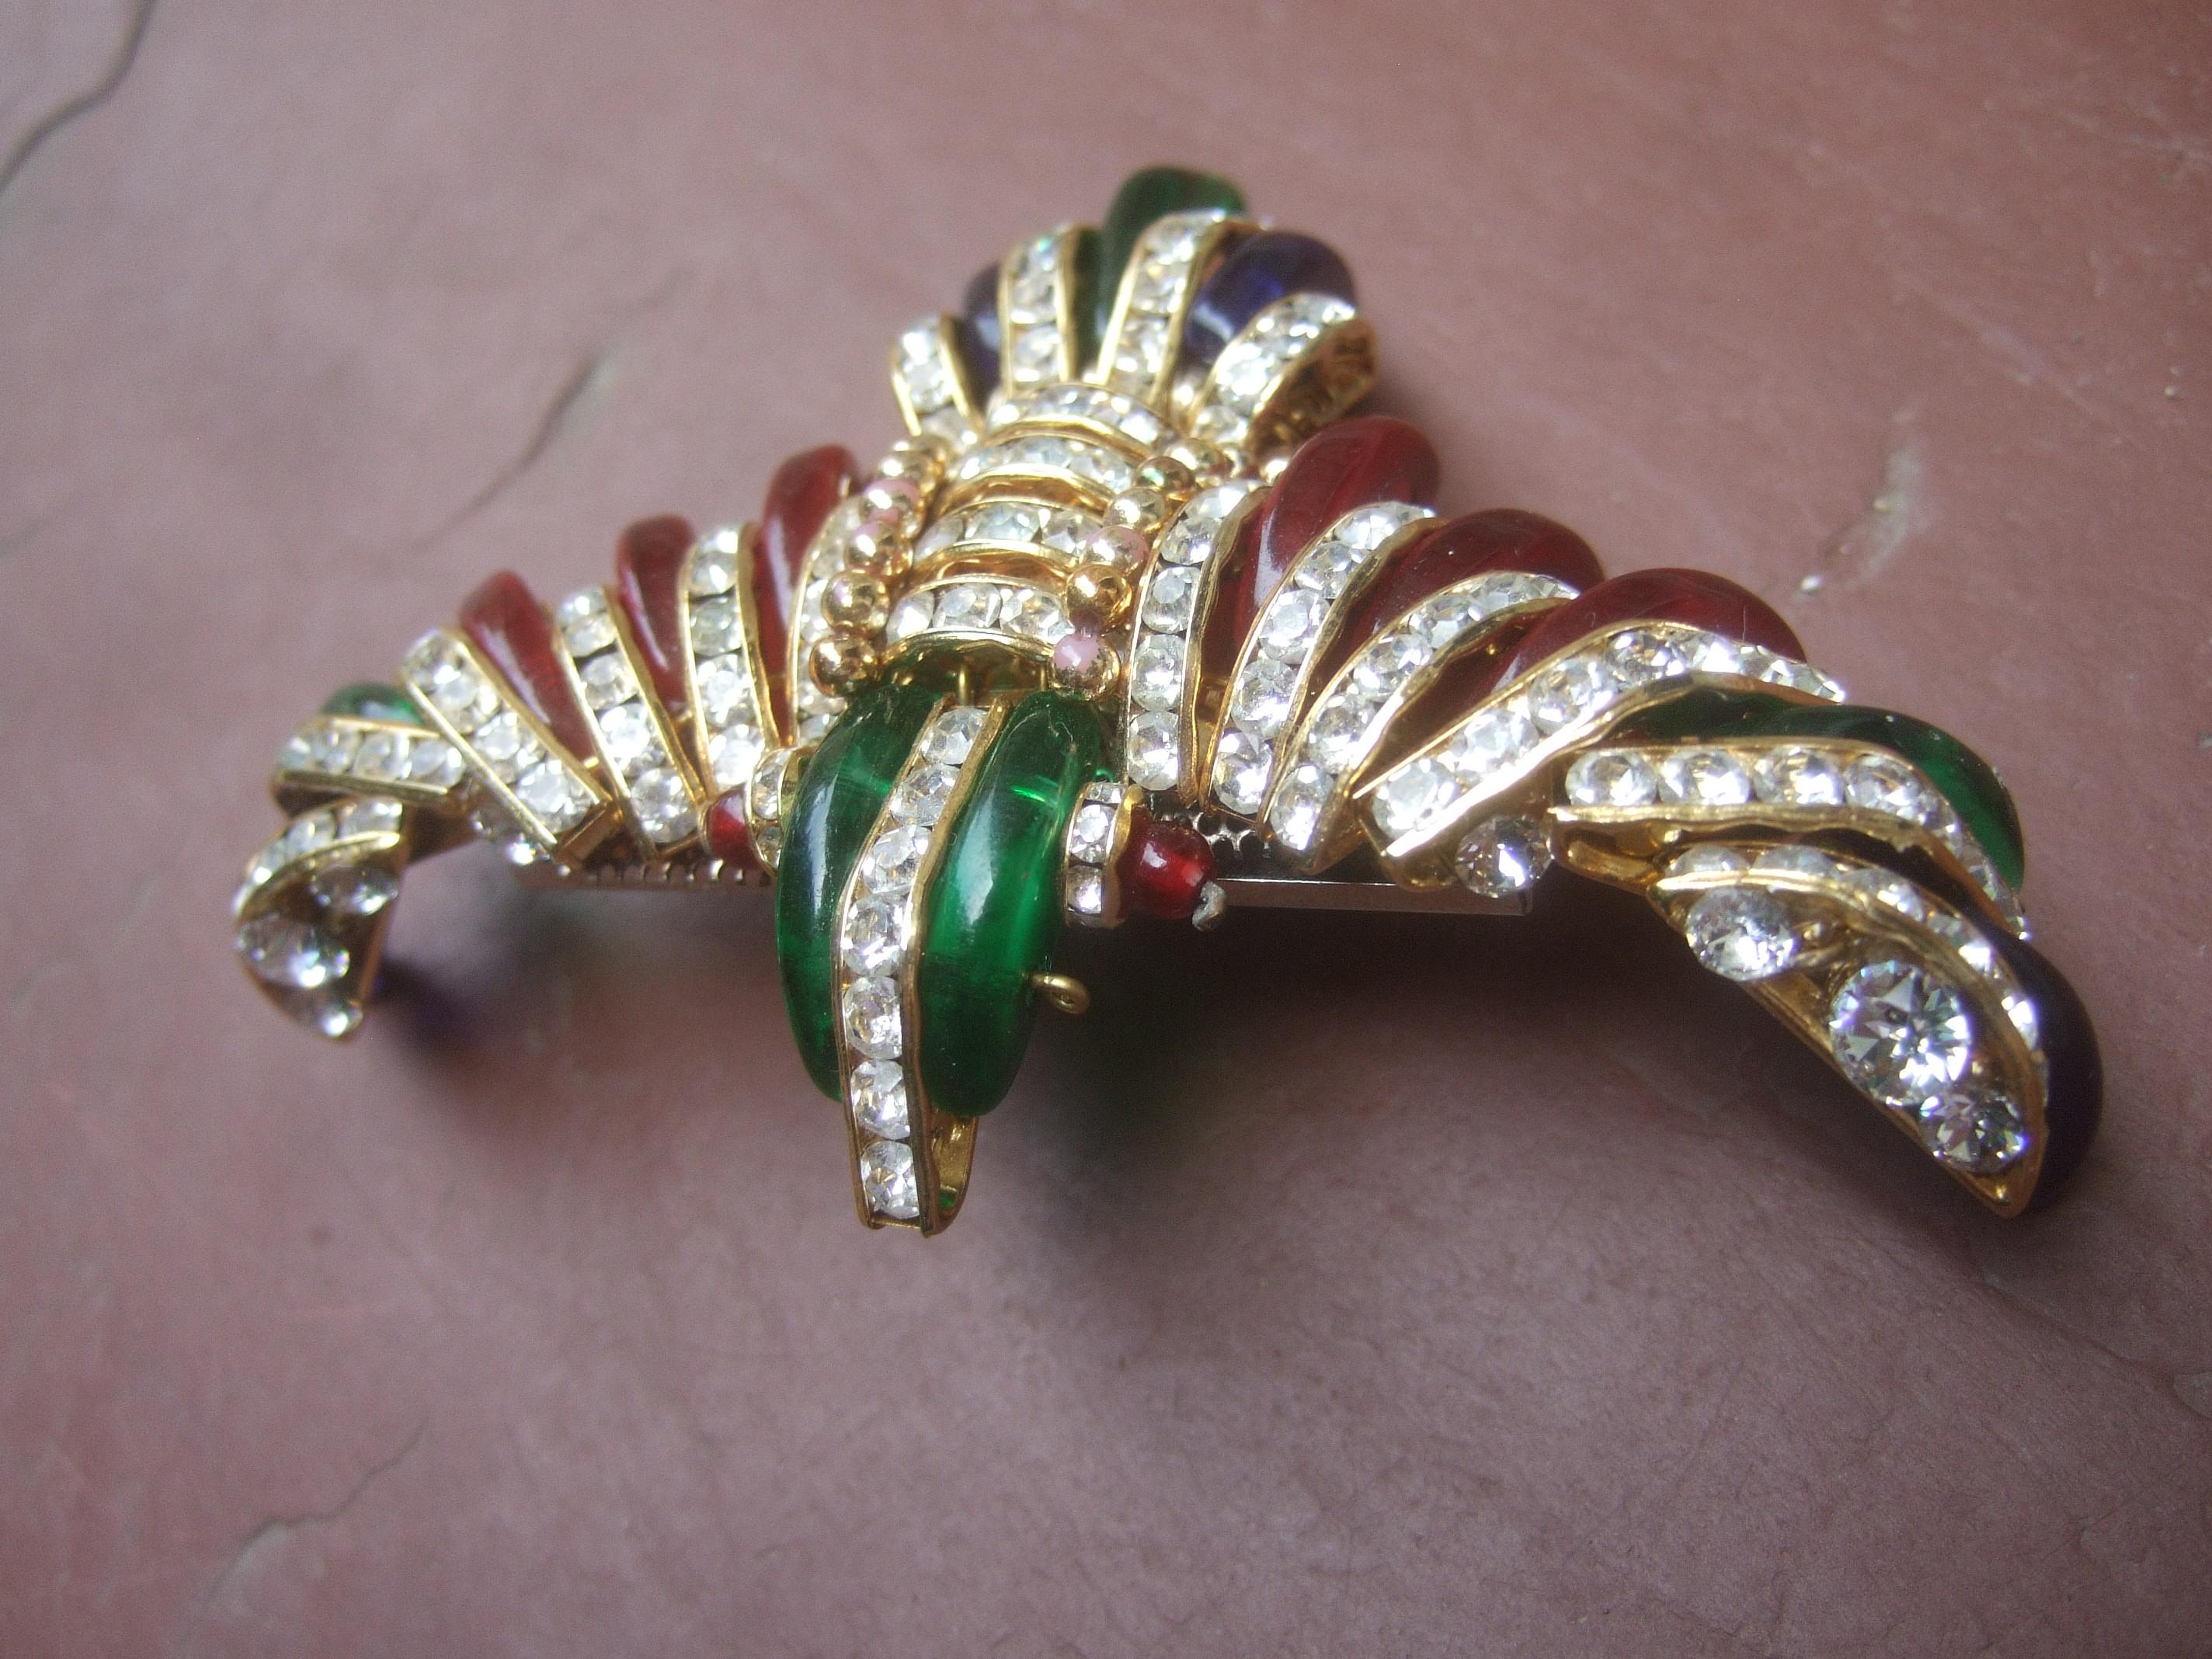 Exquisite Glass & Crystal Large Bird Brooch c 1970 15